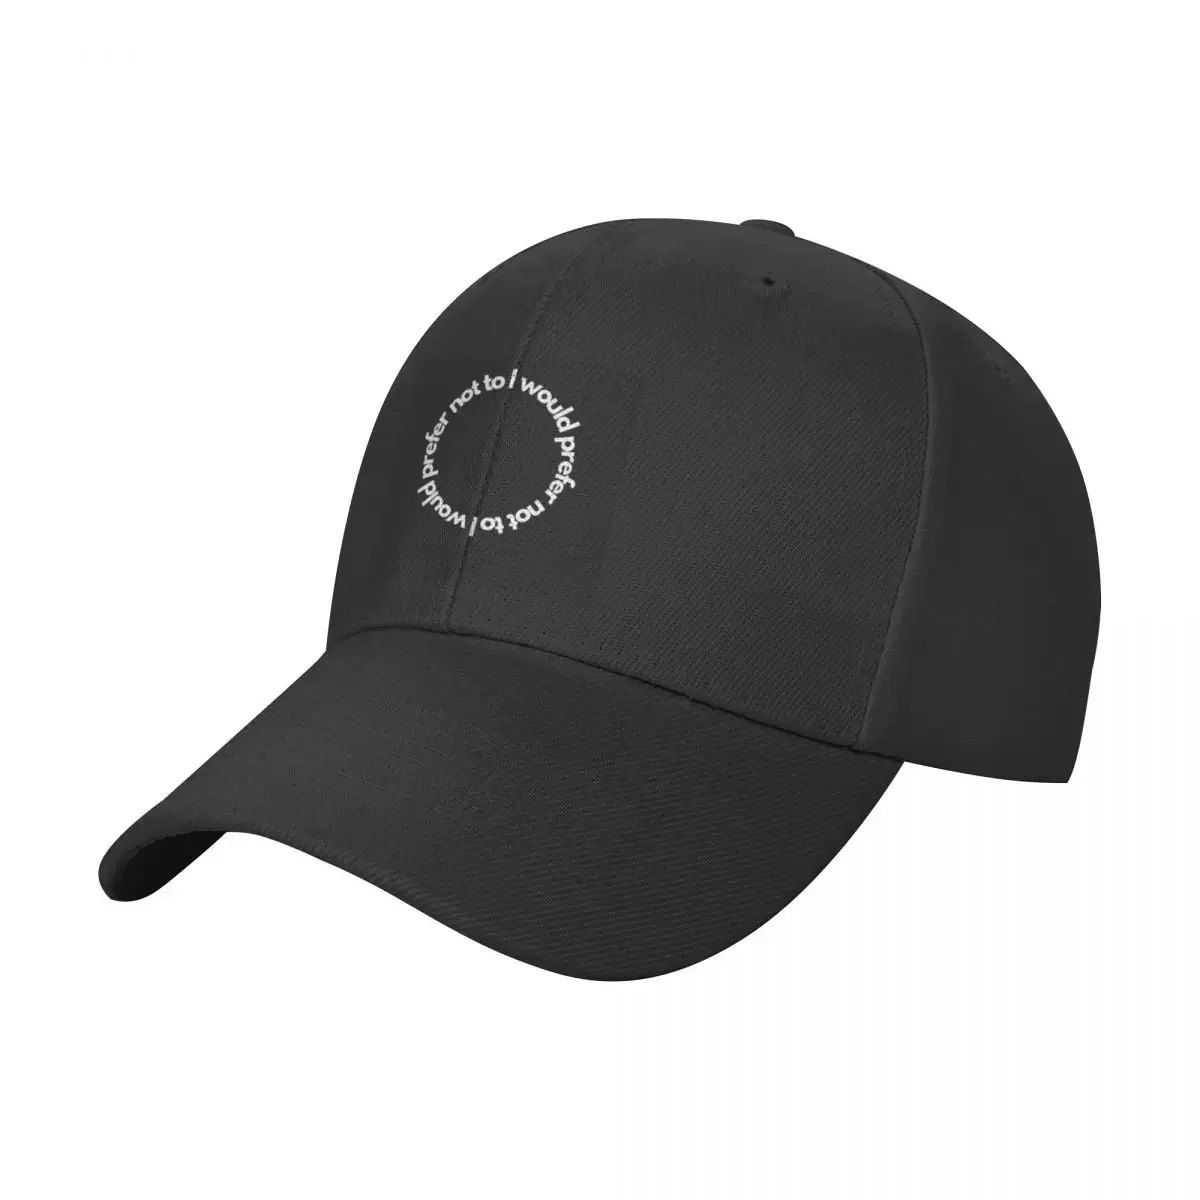 

I would prefer not to (Circular design) Baseball Cap dad hat New In Hat For Women Men's